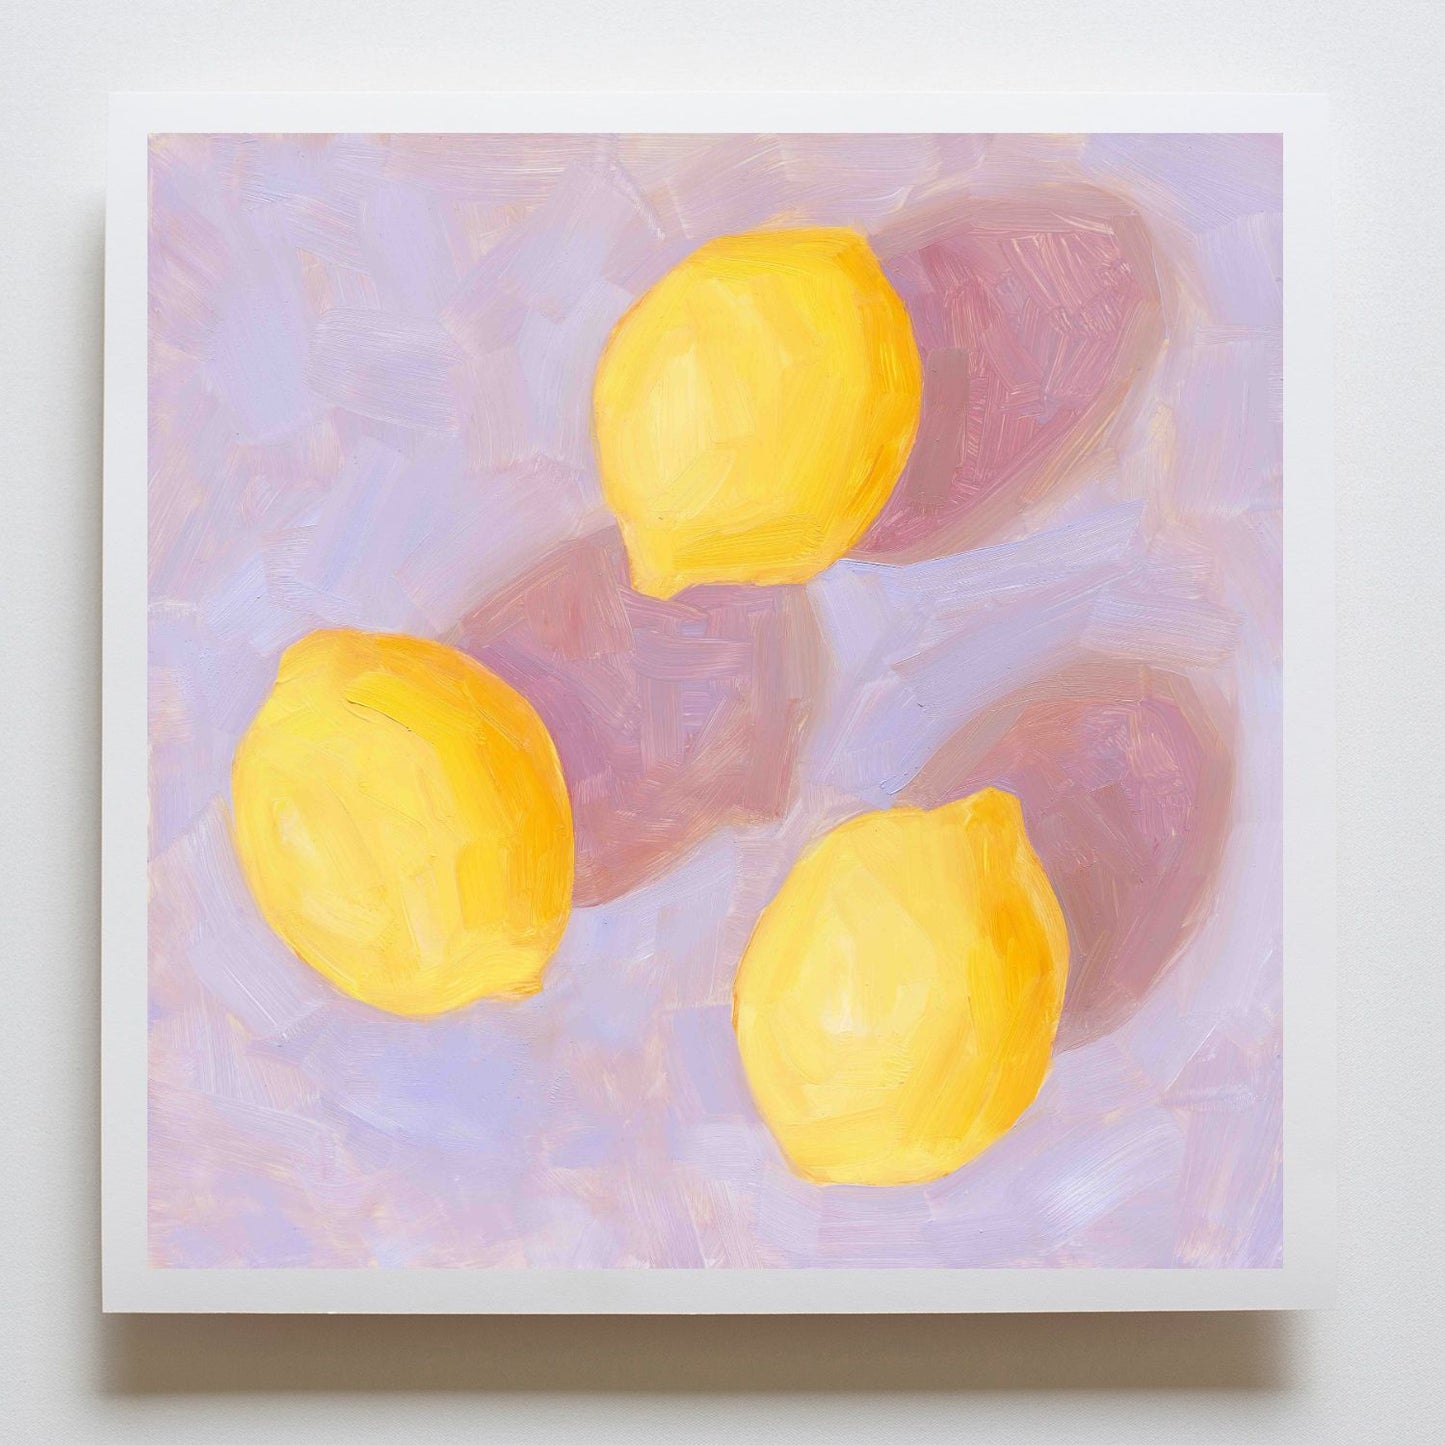 fine art paper print of an original oil painting of three vibrant lemons with strong pink shadows on a textured lilac background